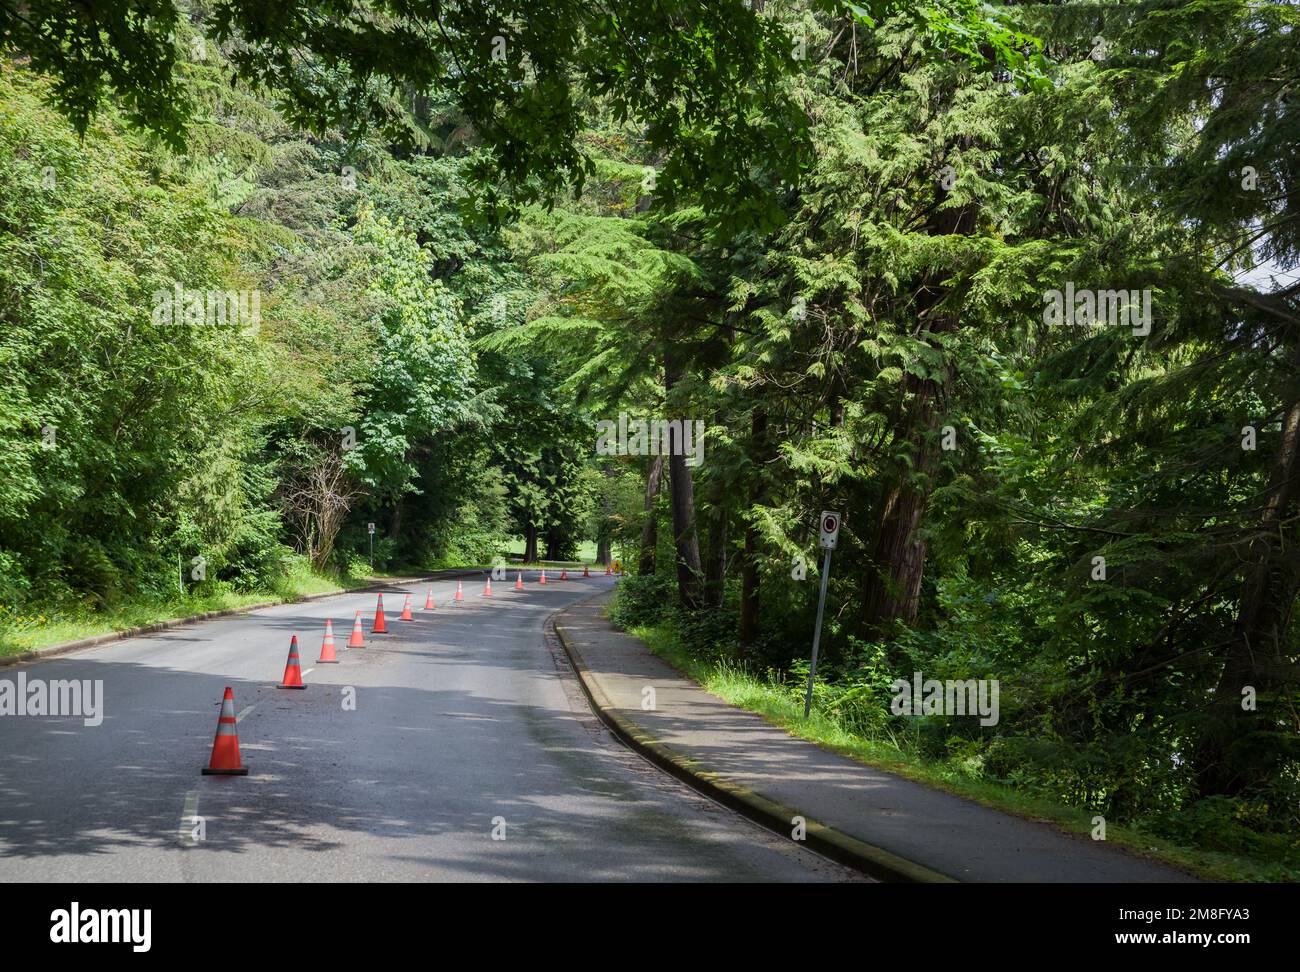 Healthy Living - Special Road Demarcation, Cone Barrier for Bike Lane in Stanley Park, Vancouver. The road in the forest. Walks in nature Stock Photo